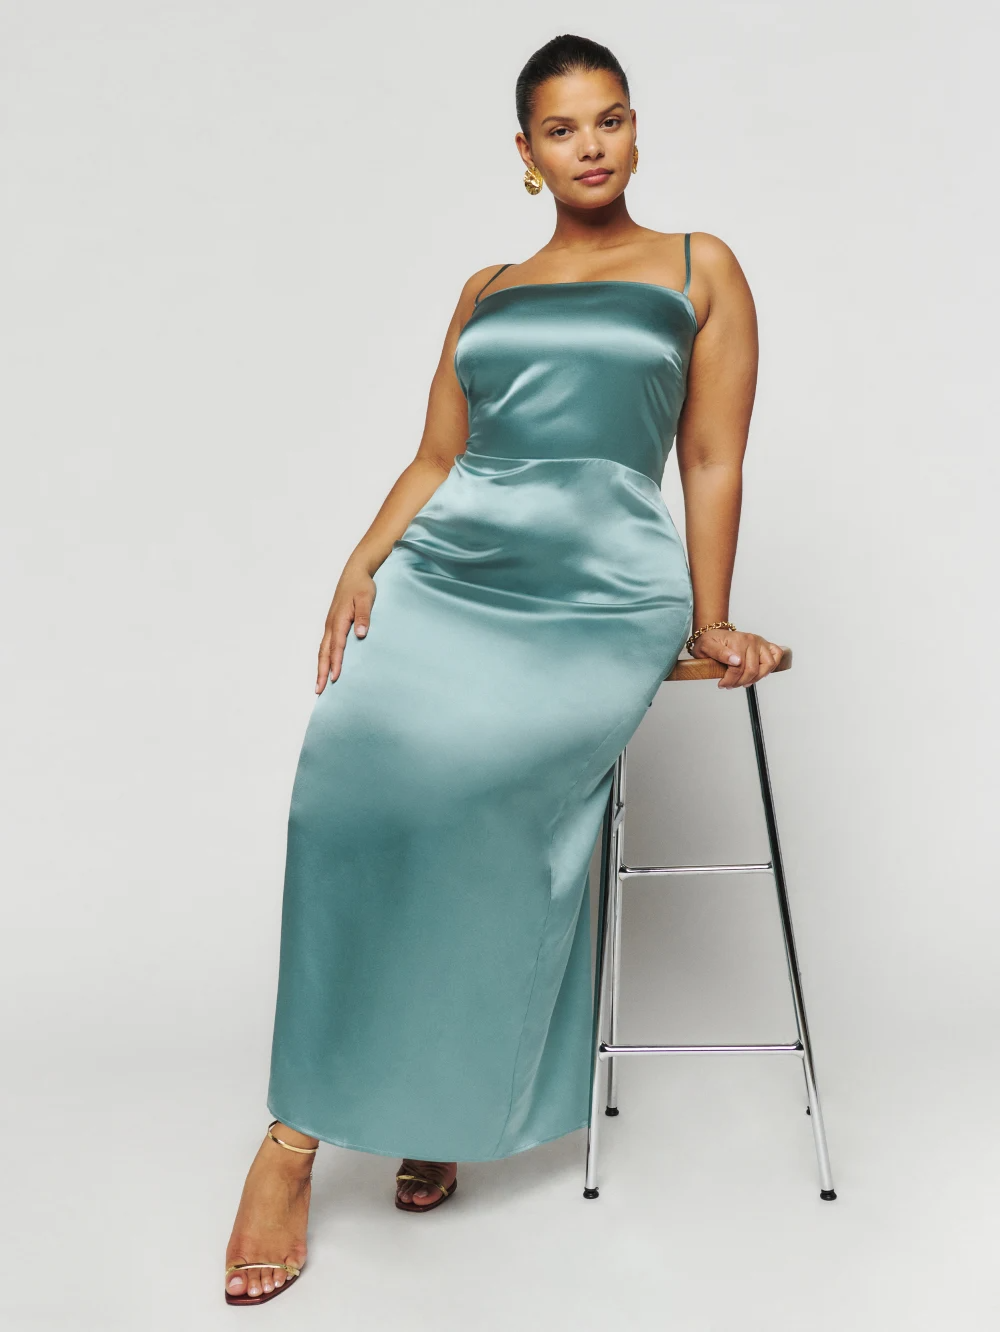 Nordstrom Rack sale: 10 stylish plus-size summer dresses to level up your  wardrobe